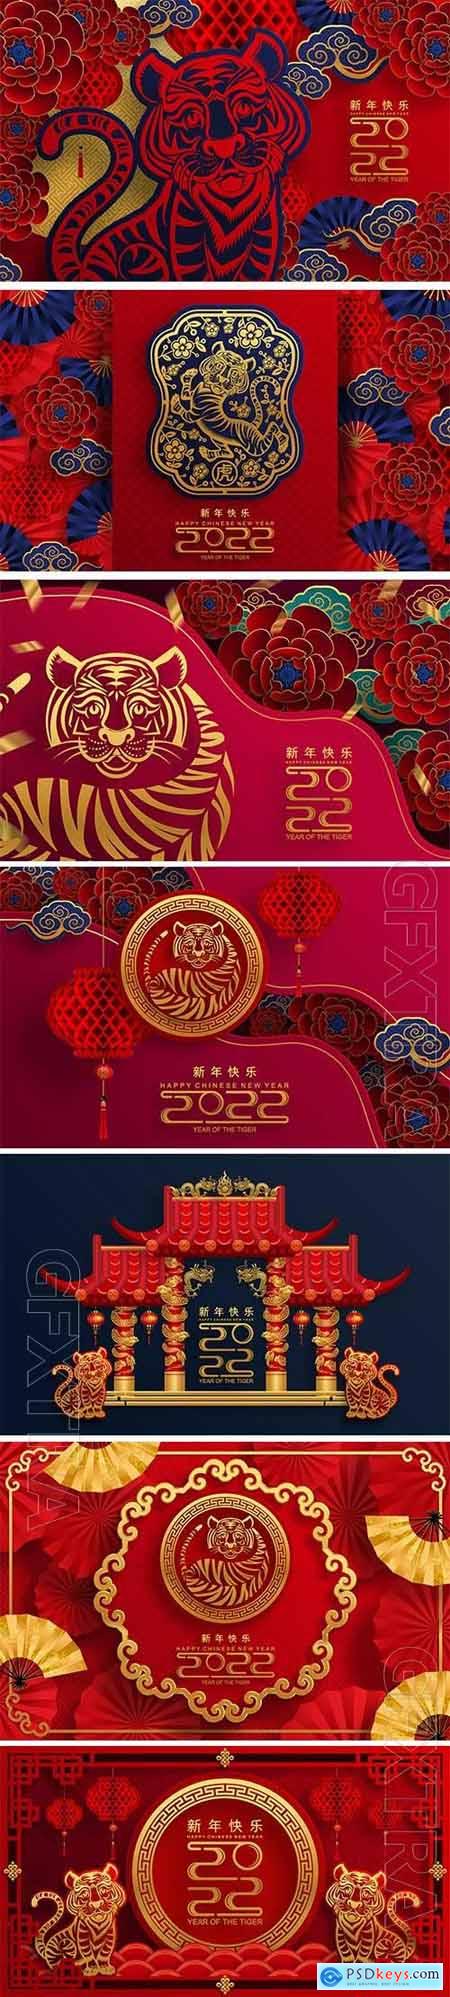 Chinese New Year, illustration with tiger, symbol of 2022, vector texts vol 2